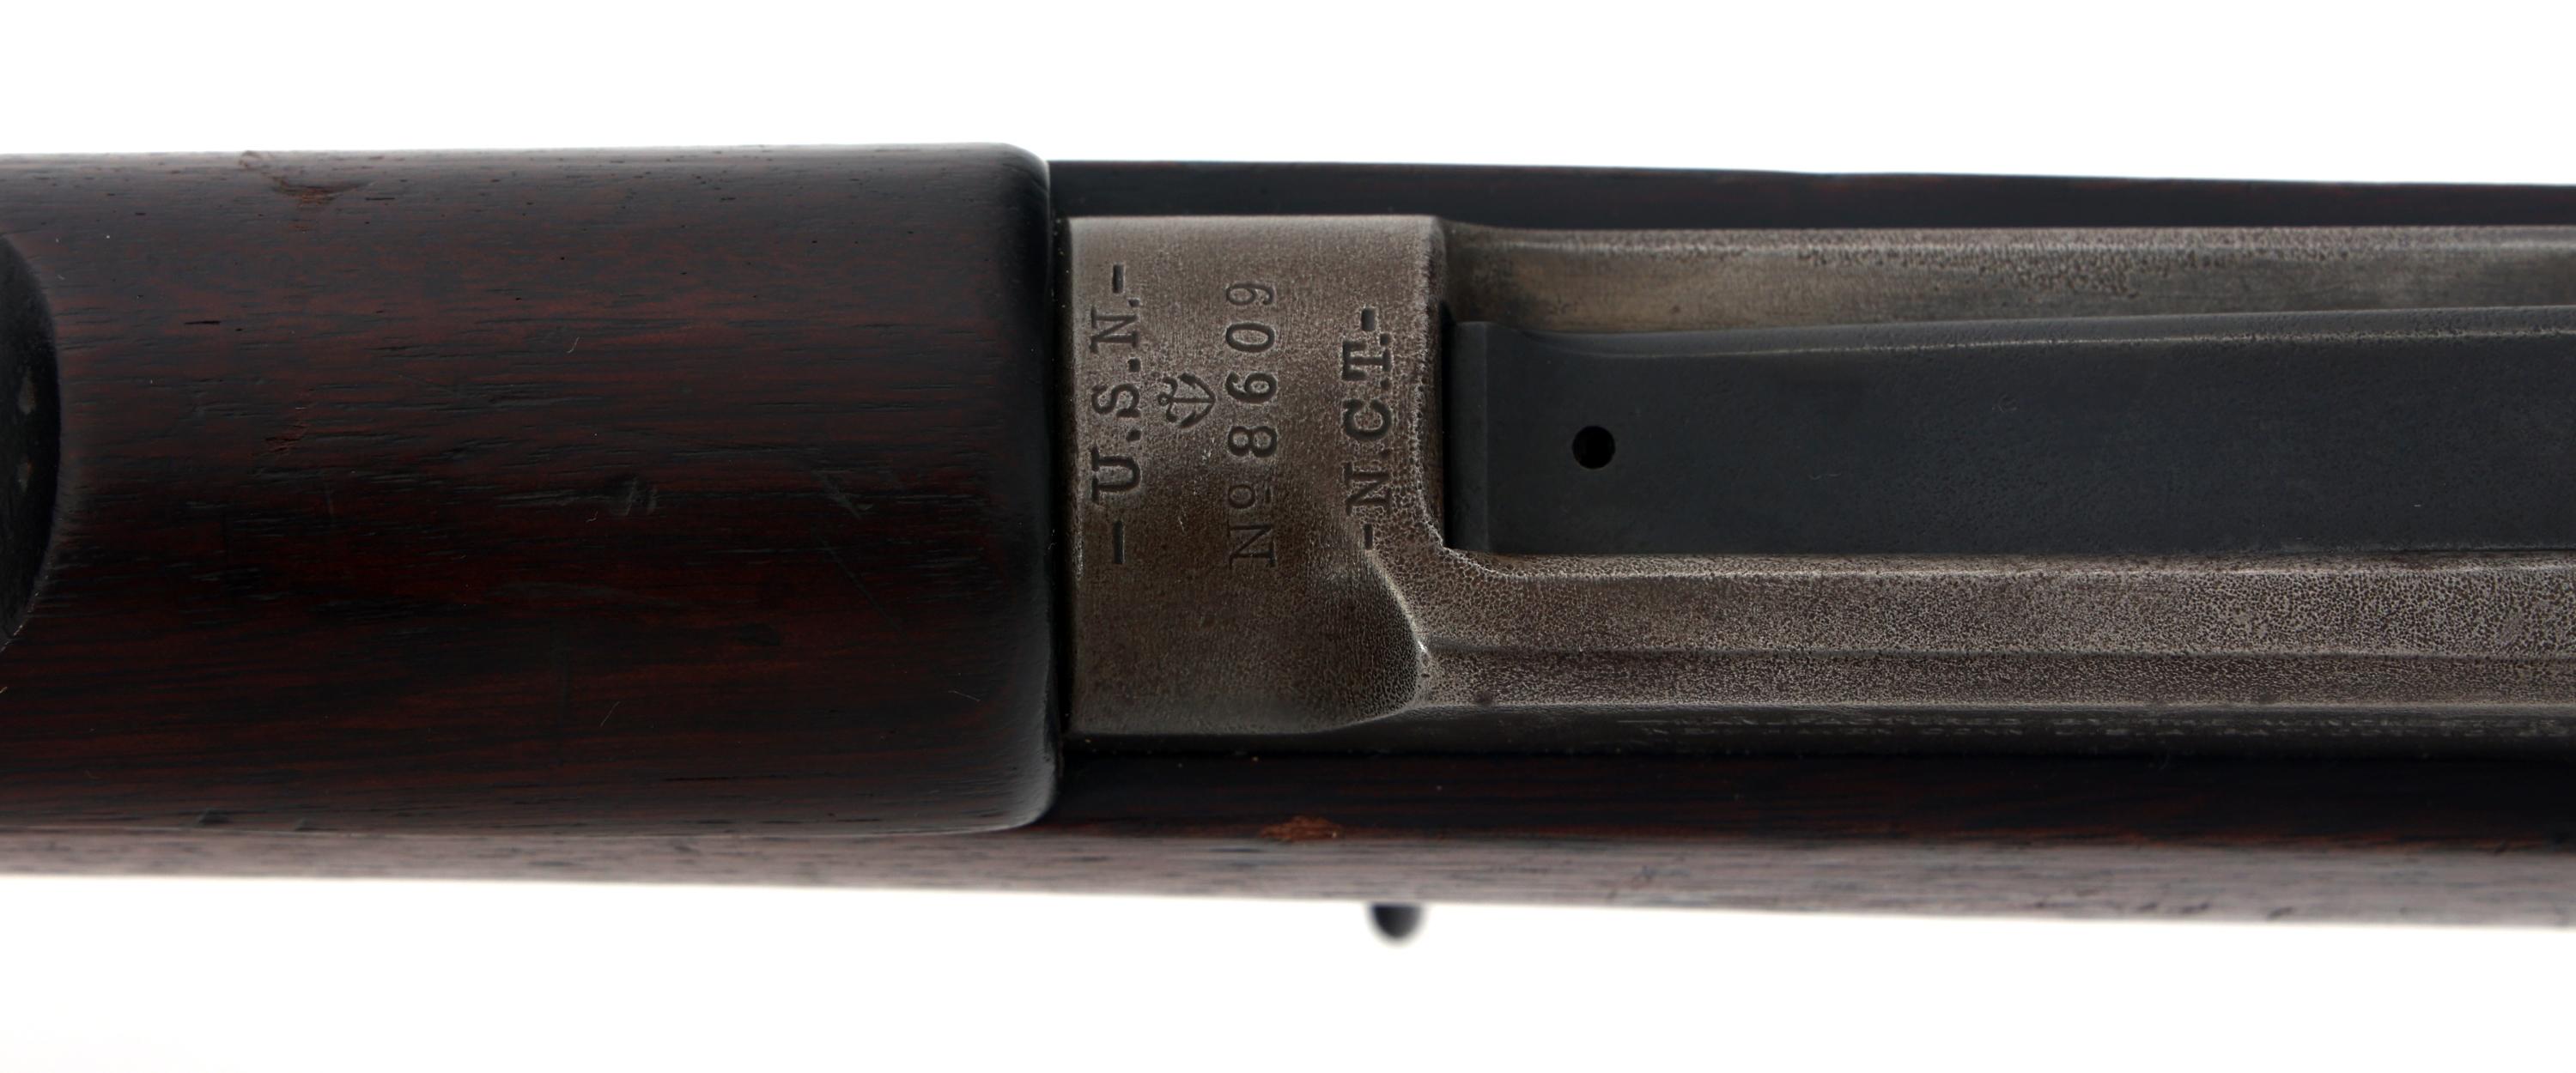 1897 US WINCHESTER MODEL 1895 LEE NAVY 6mm RIFLE